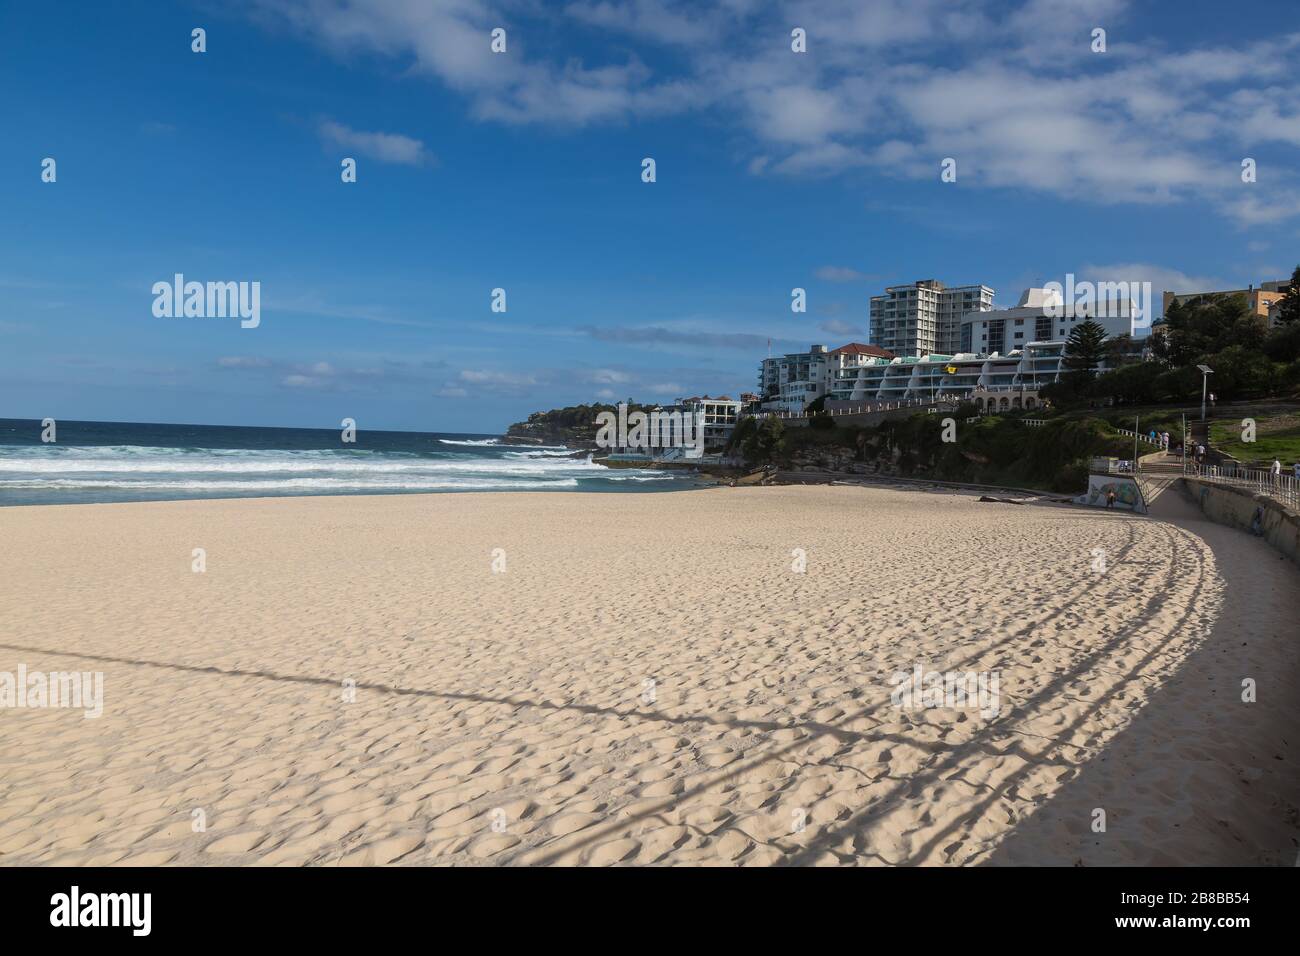 Bondi Beach was closed today due to unacceptable crowds yesterday. Recent social distancing rules were ignored and as a result the government had to c Stock Photo